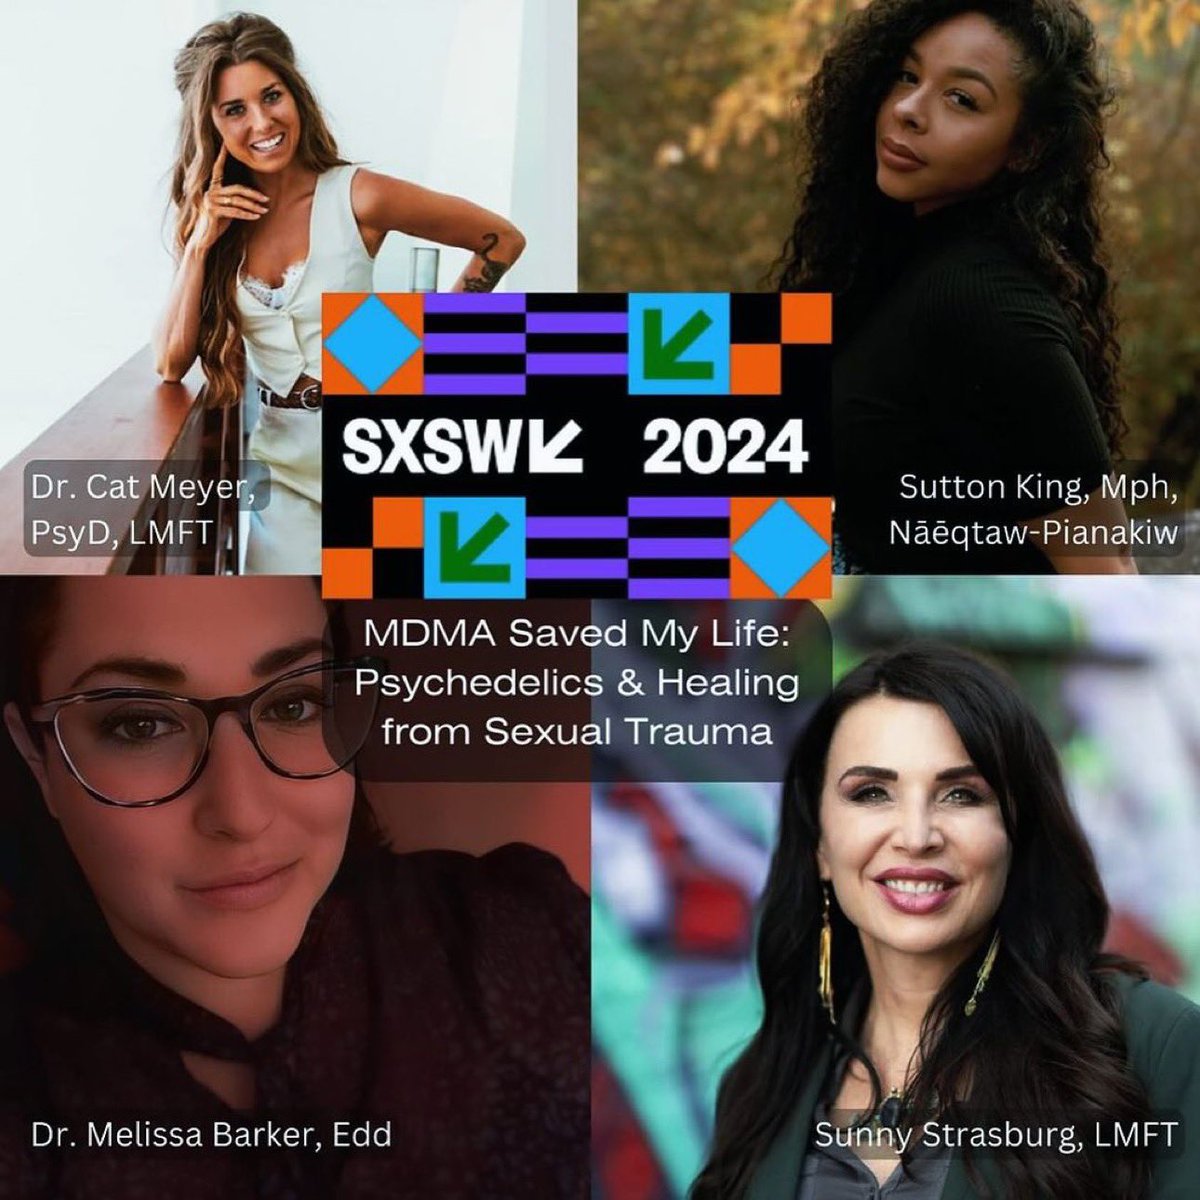 Excited to join this panel focusing on the power of MDMA +other psychedelics for healing s.xual trauma. Catch us at SXSW in Austin March 8th at 2:30 CMT Entitled: MDMD Saved My Life. It’s going to be a powerful and healing conversation🌱